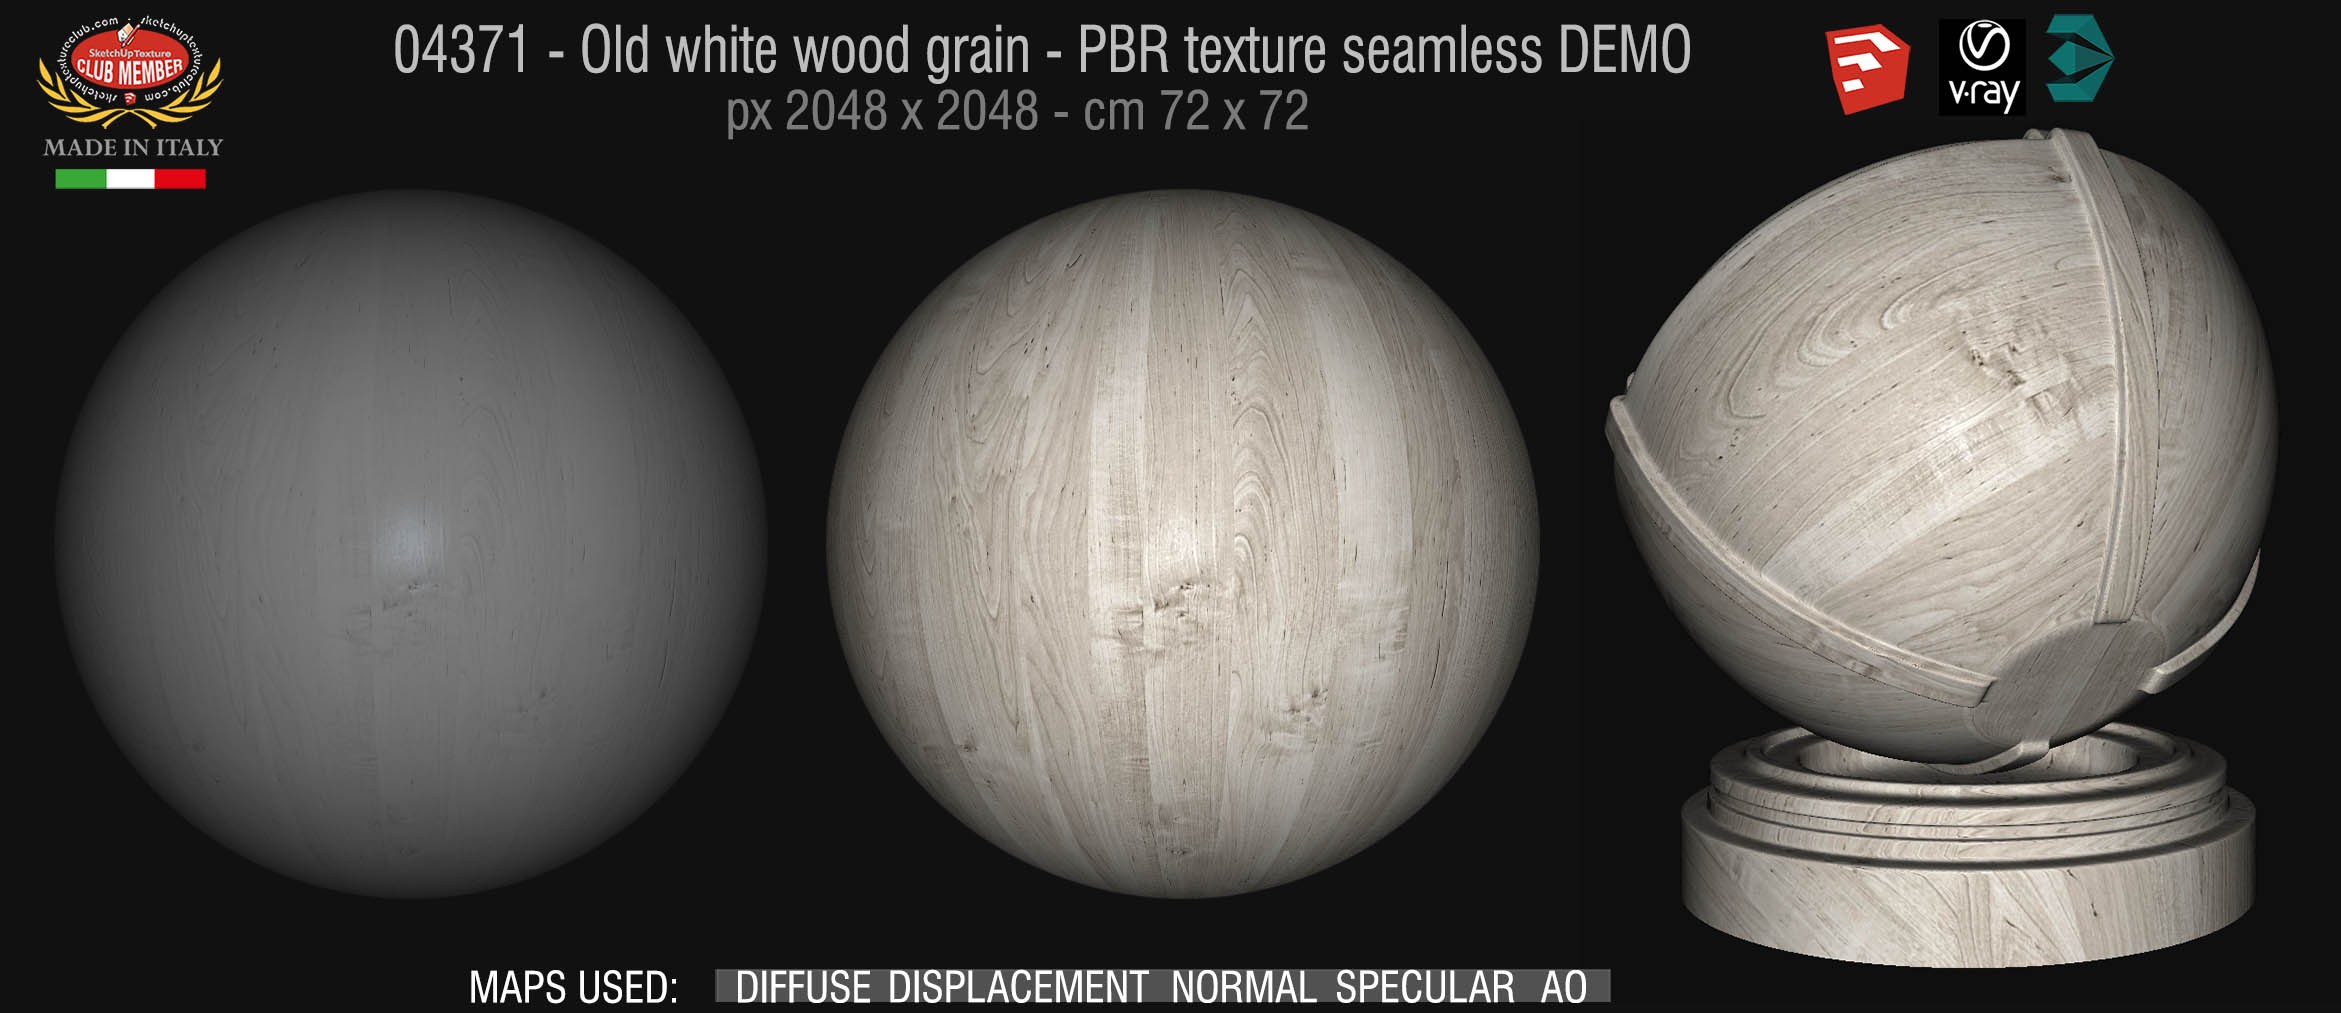 04371 Old white wood grain - PBR texture seamless DEMO